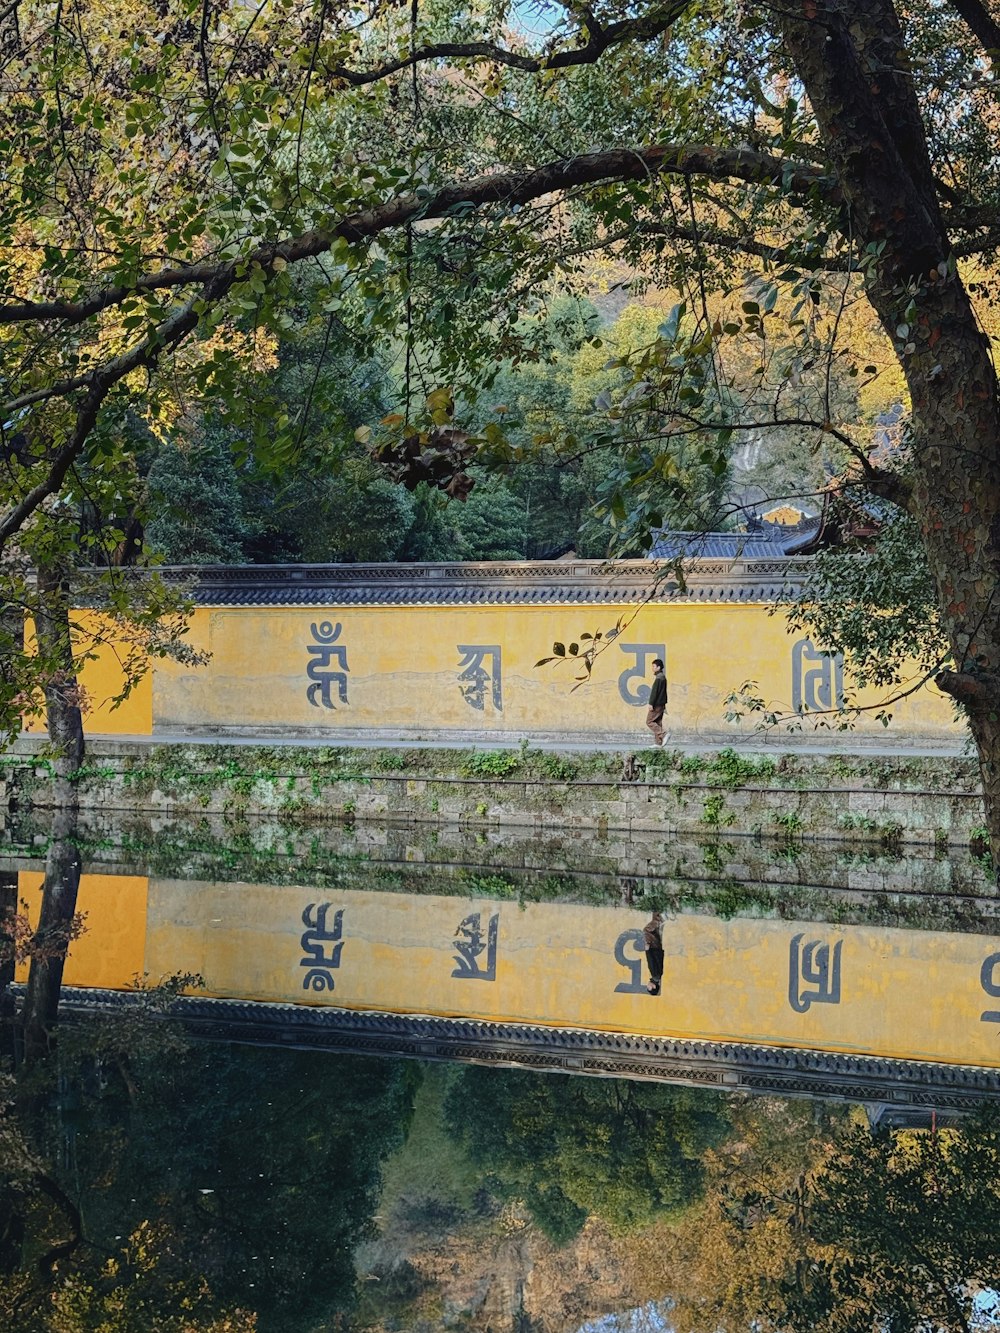 a yellow bridge over a body of water surrounded by trees